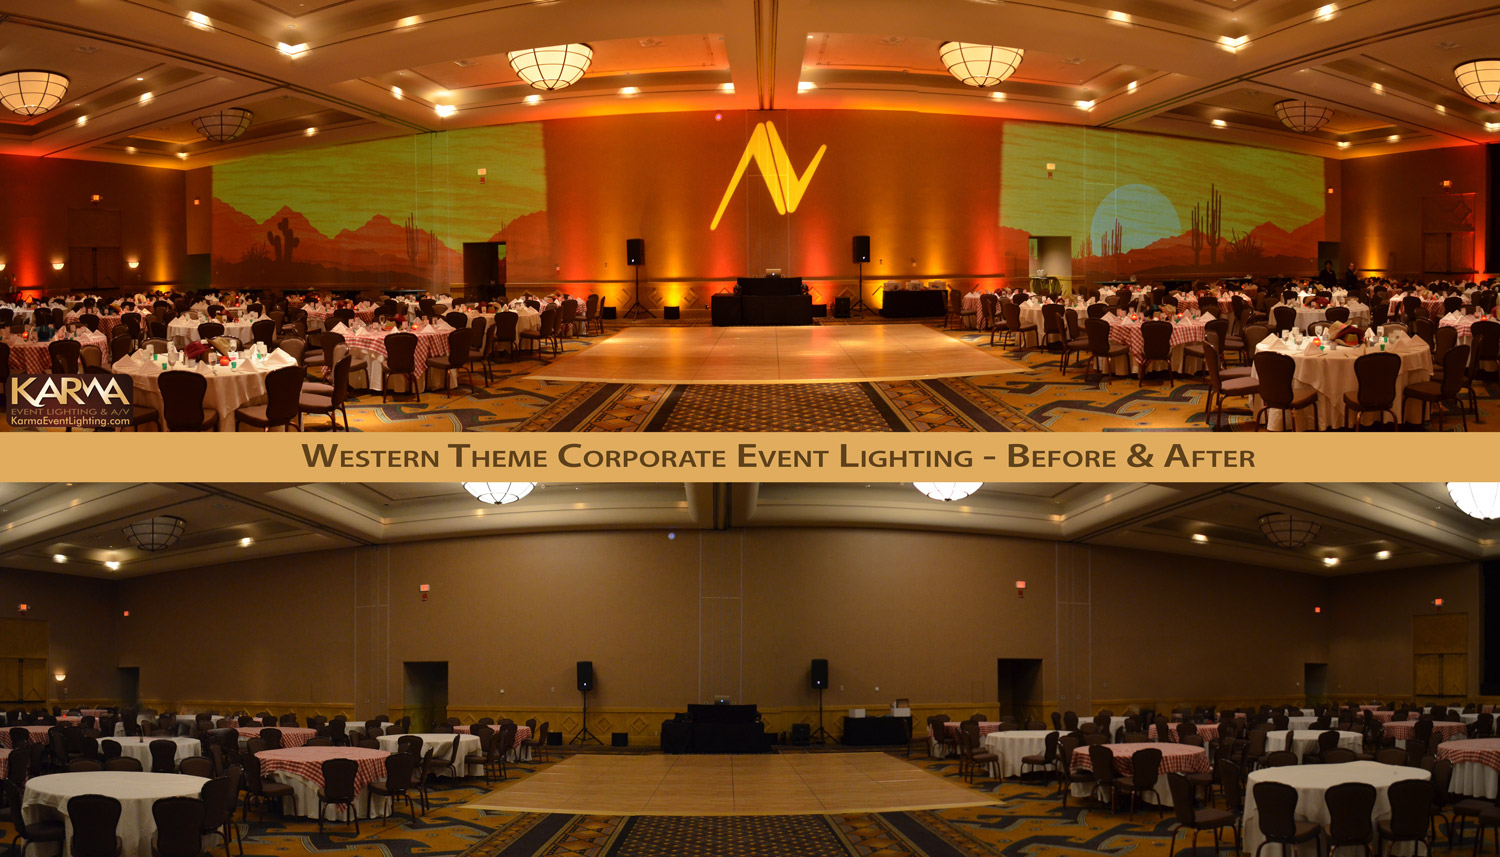 Western Themed Event Lighting for Corporate Event at The Wigwam Resort